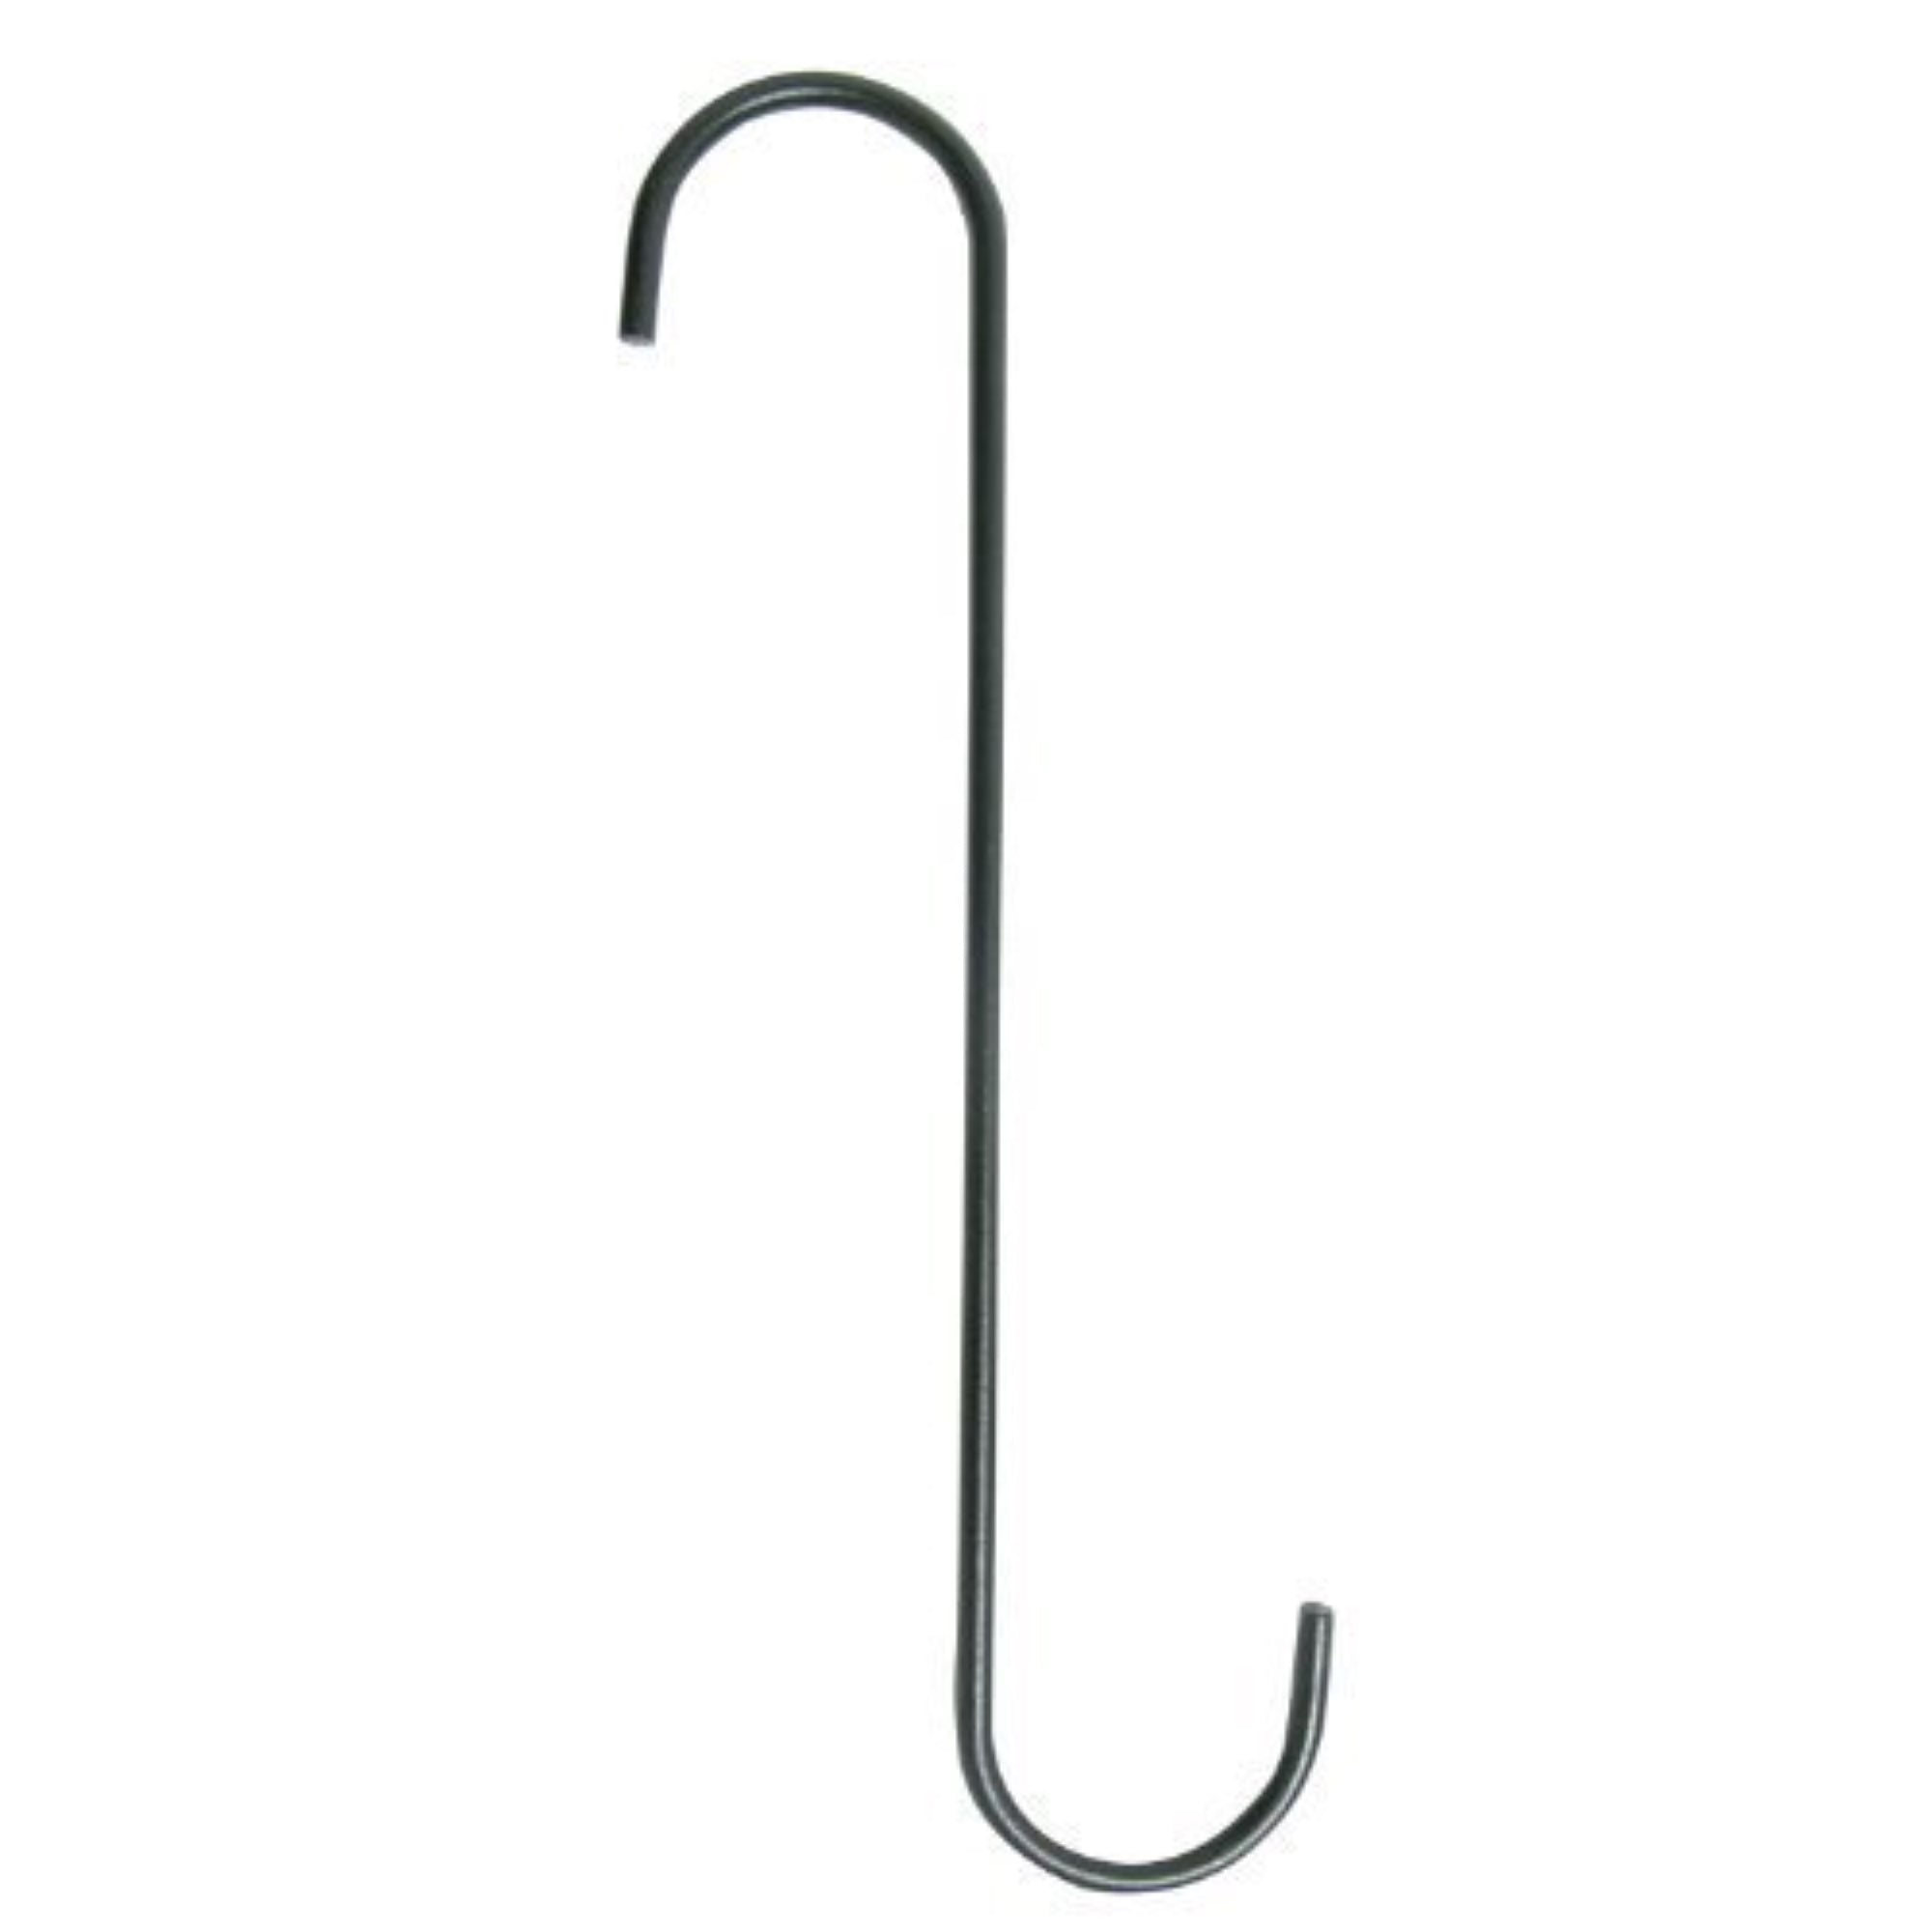 The Hookery GH12 S Extension Hook For Planters/Bird Feeders, Black, 12"